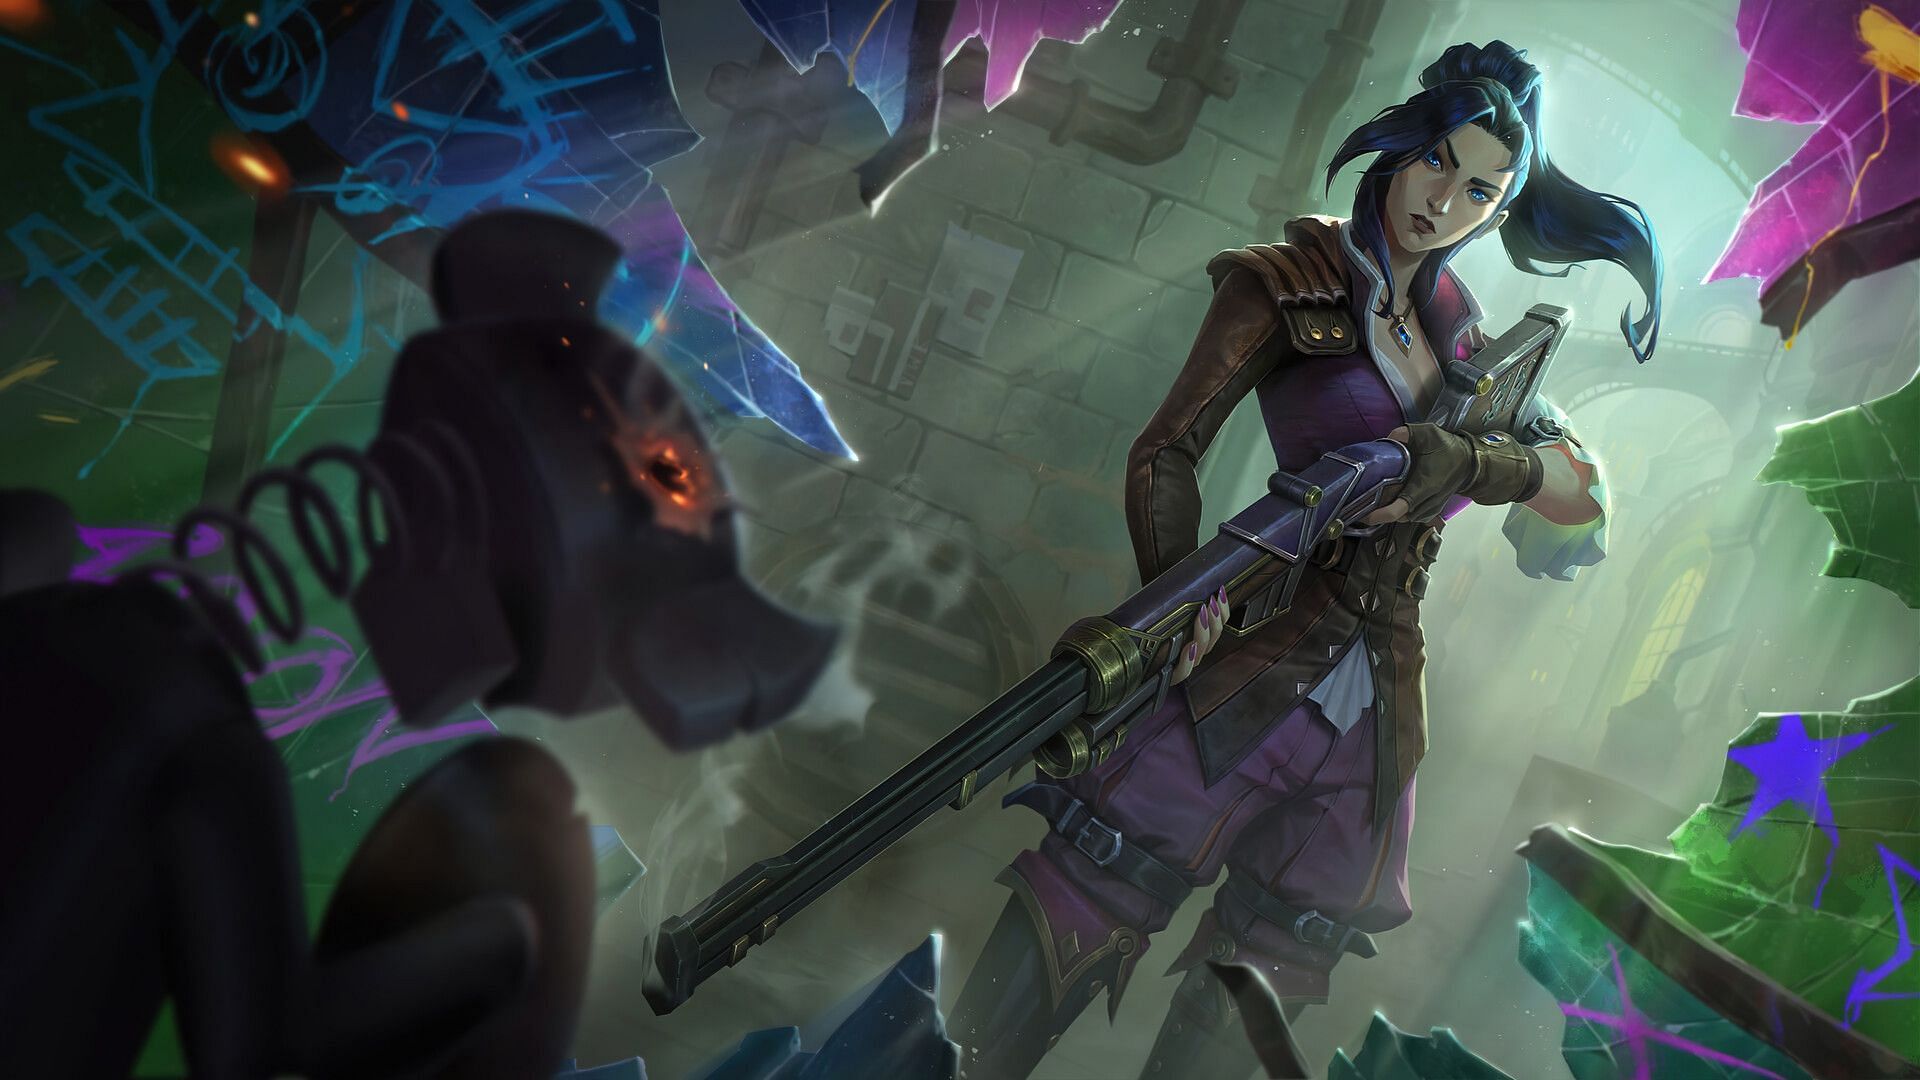 How To Get Free Arcane Themed Skins For Jayce Caitlyn Vi And Jinx In League Of Legends 